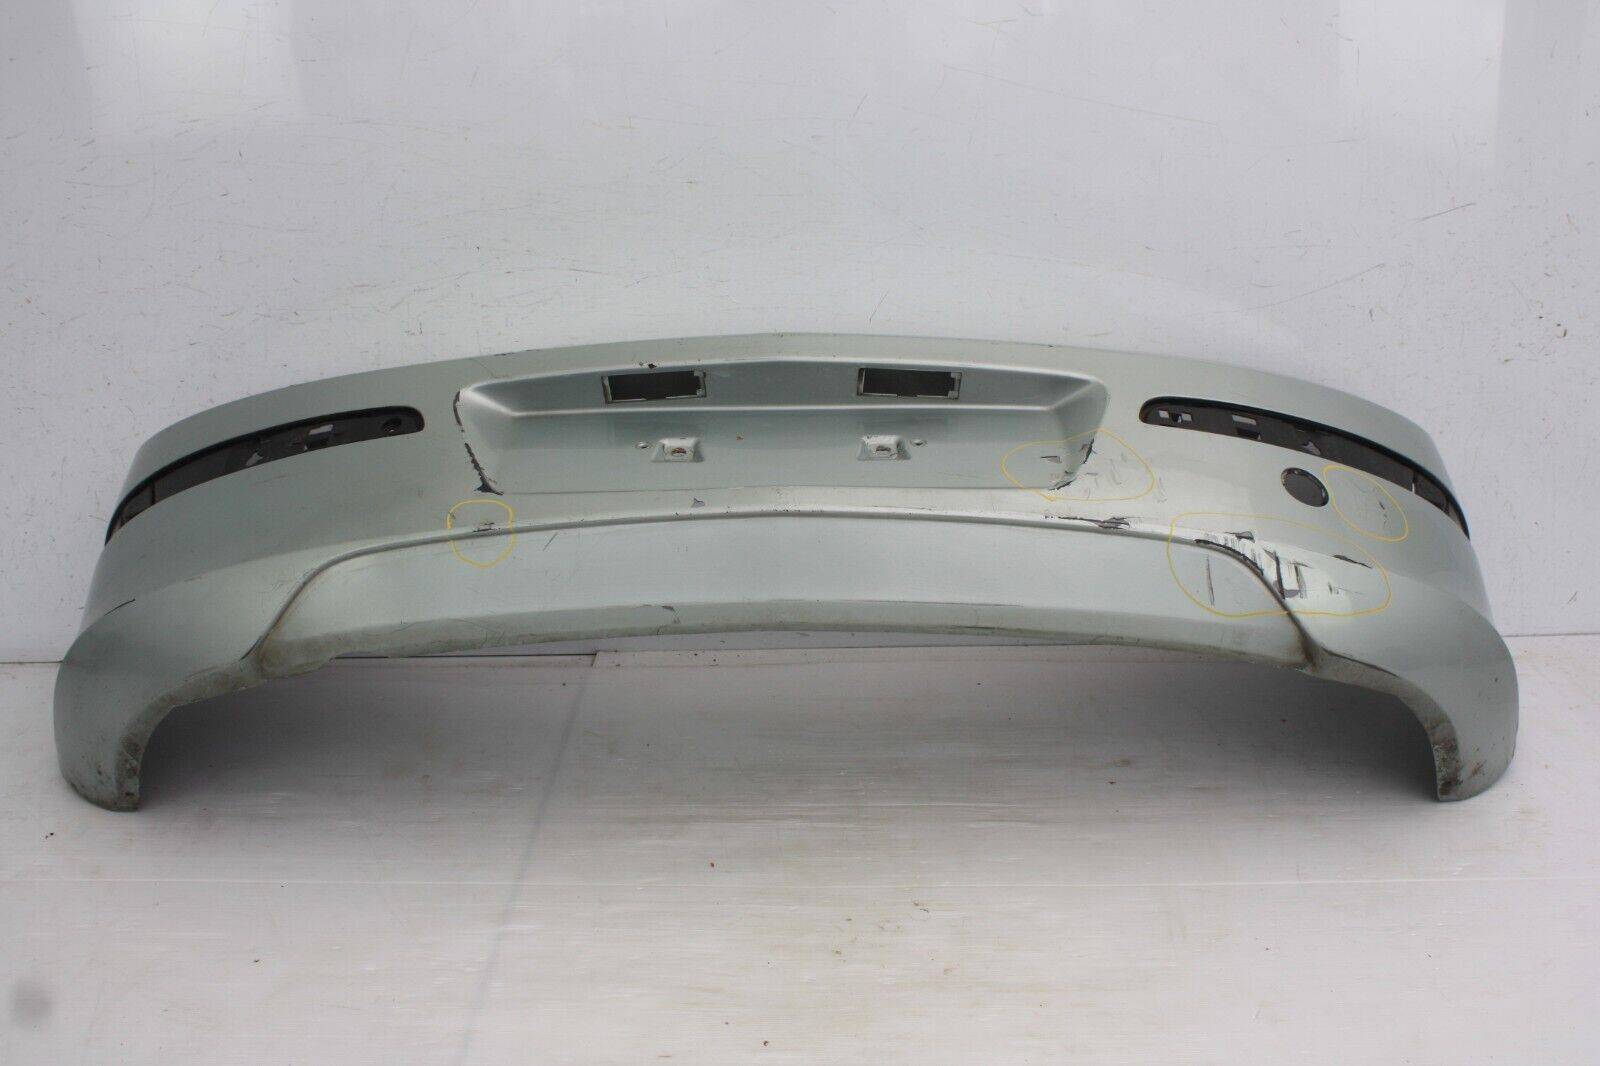 Vauxhall-Astra-H-5DR-Rear-Bumper-2004-TO-2009-24460353-Genuine-175623779959-11